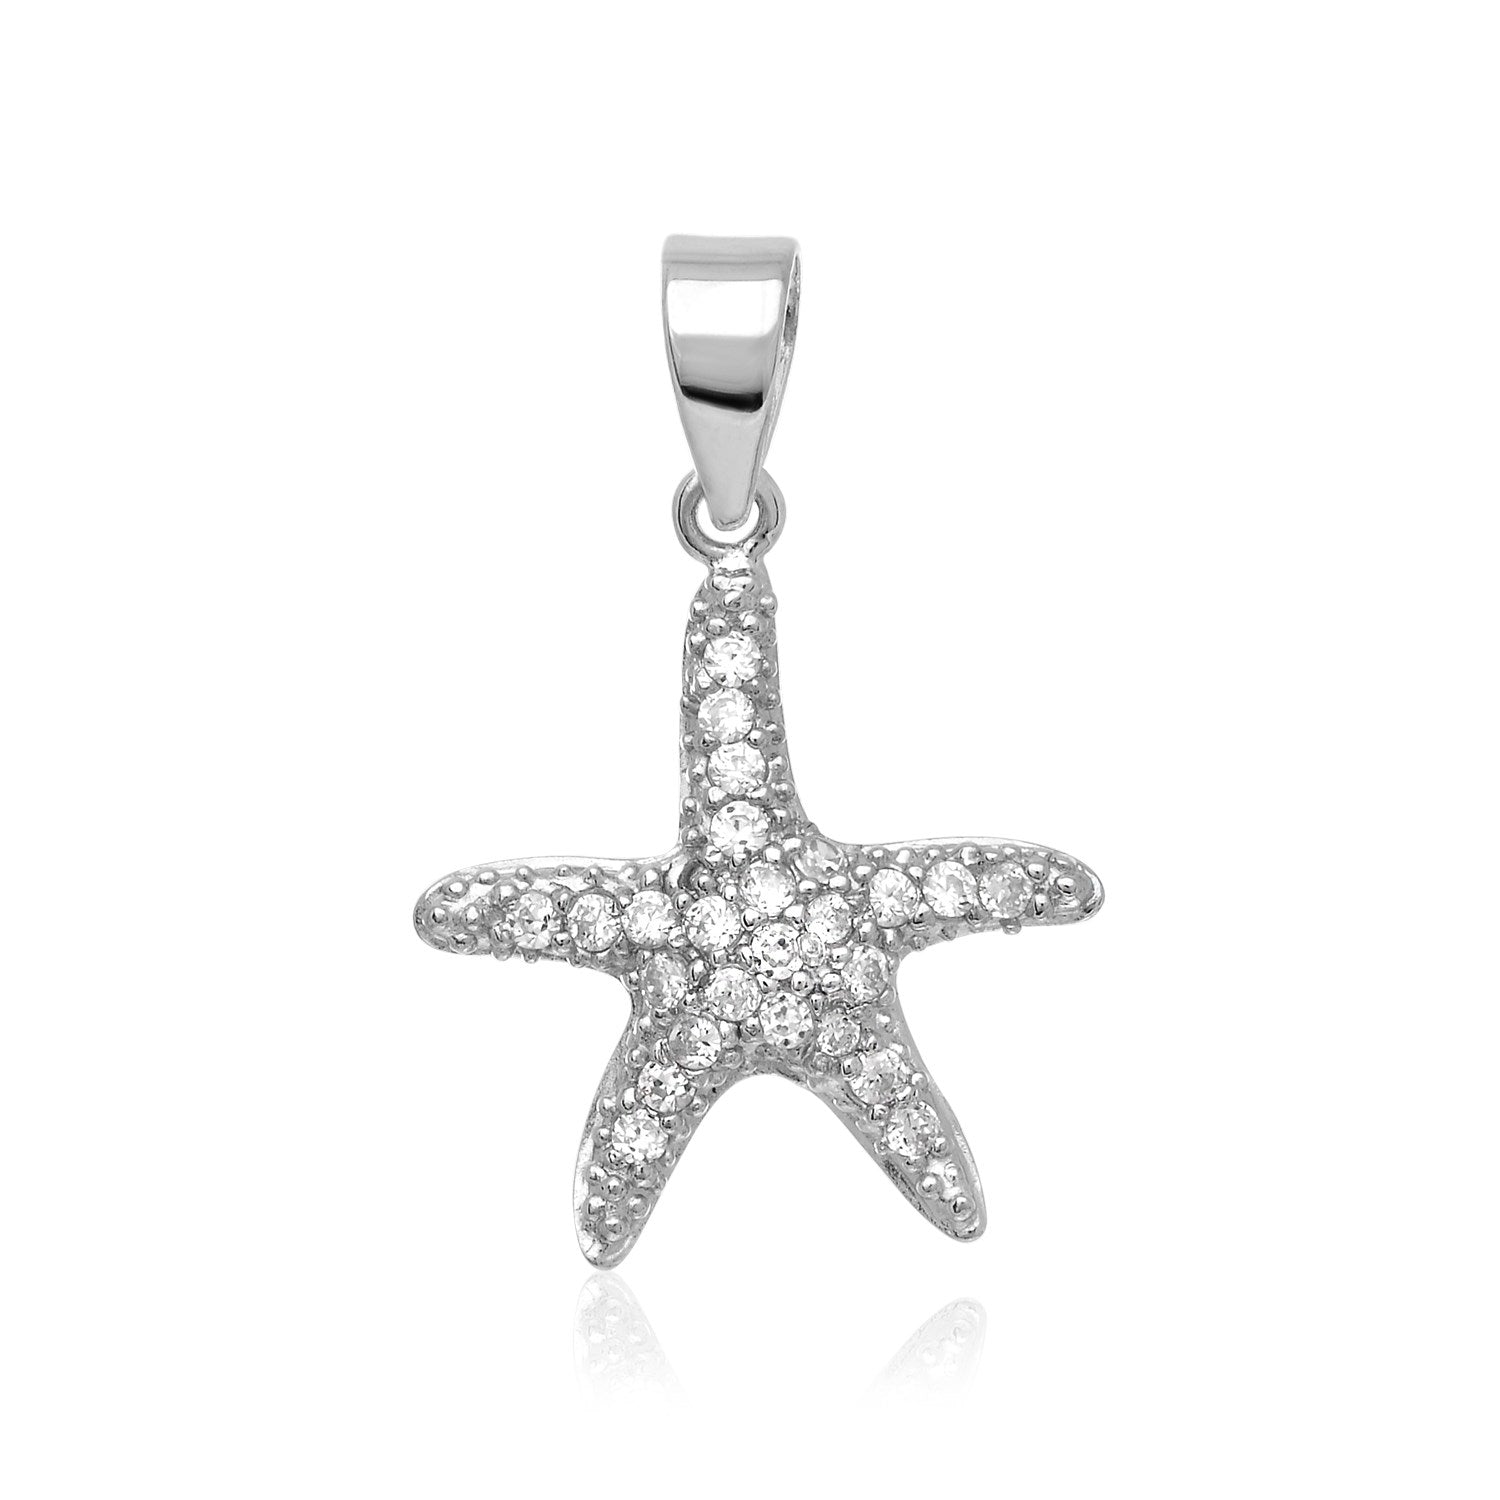 Sterling Silver Petite Starfish Pendant with Cubic Zirconias